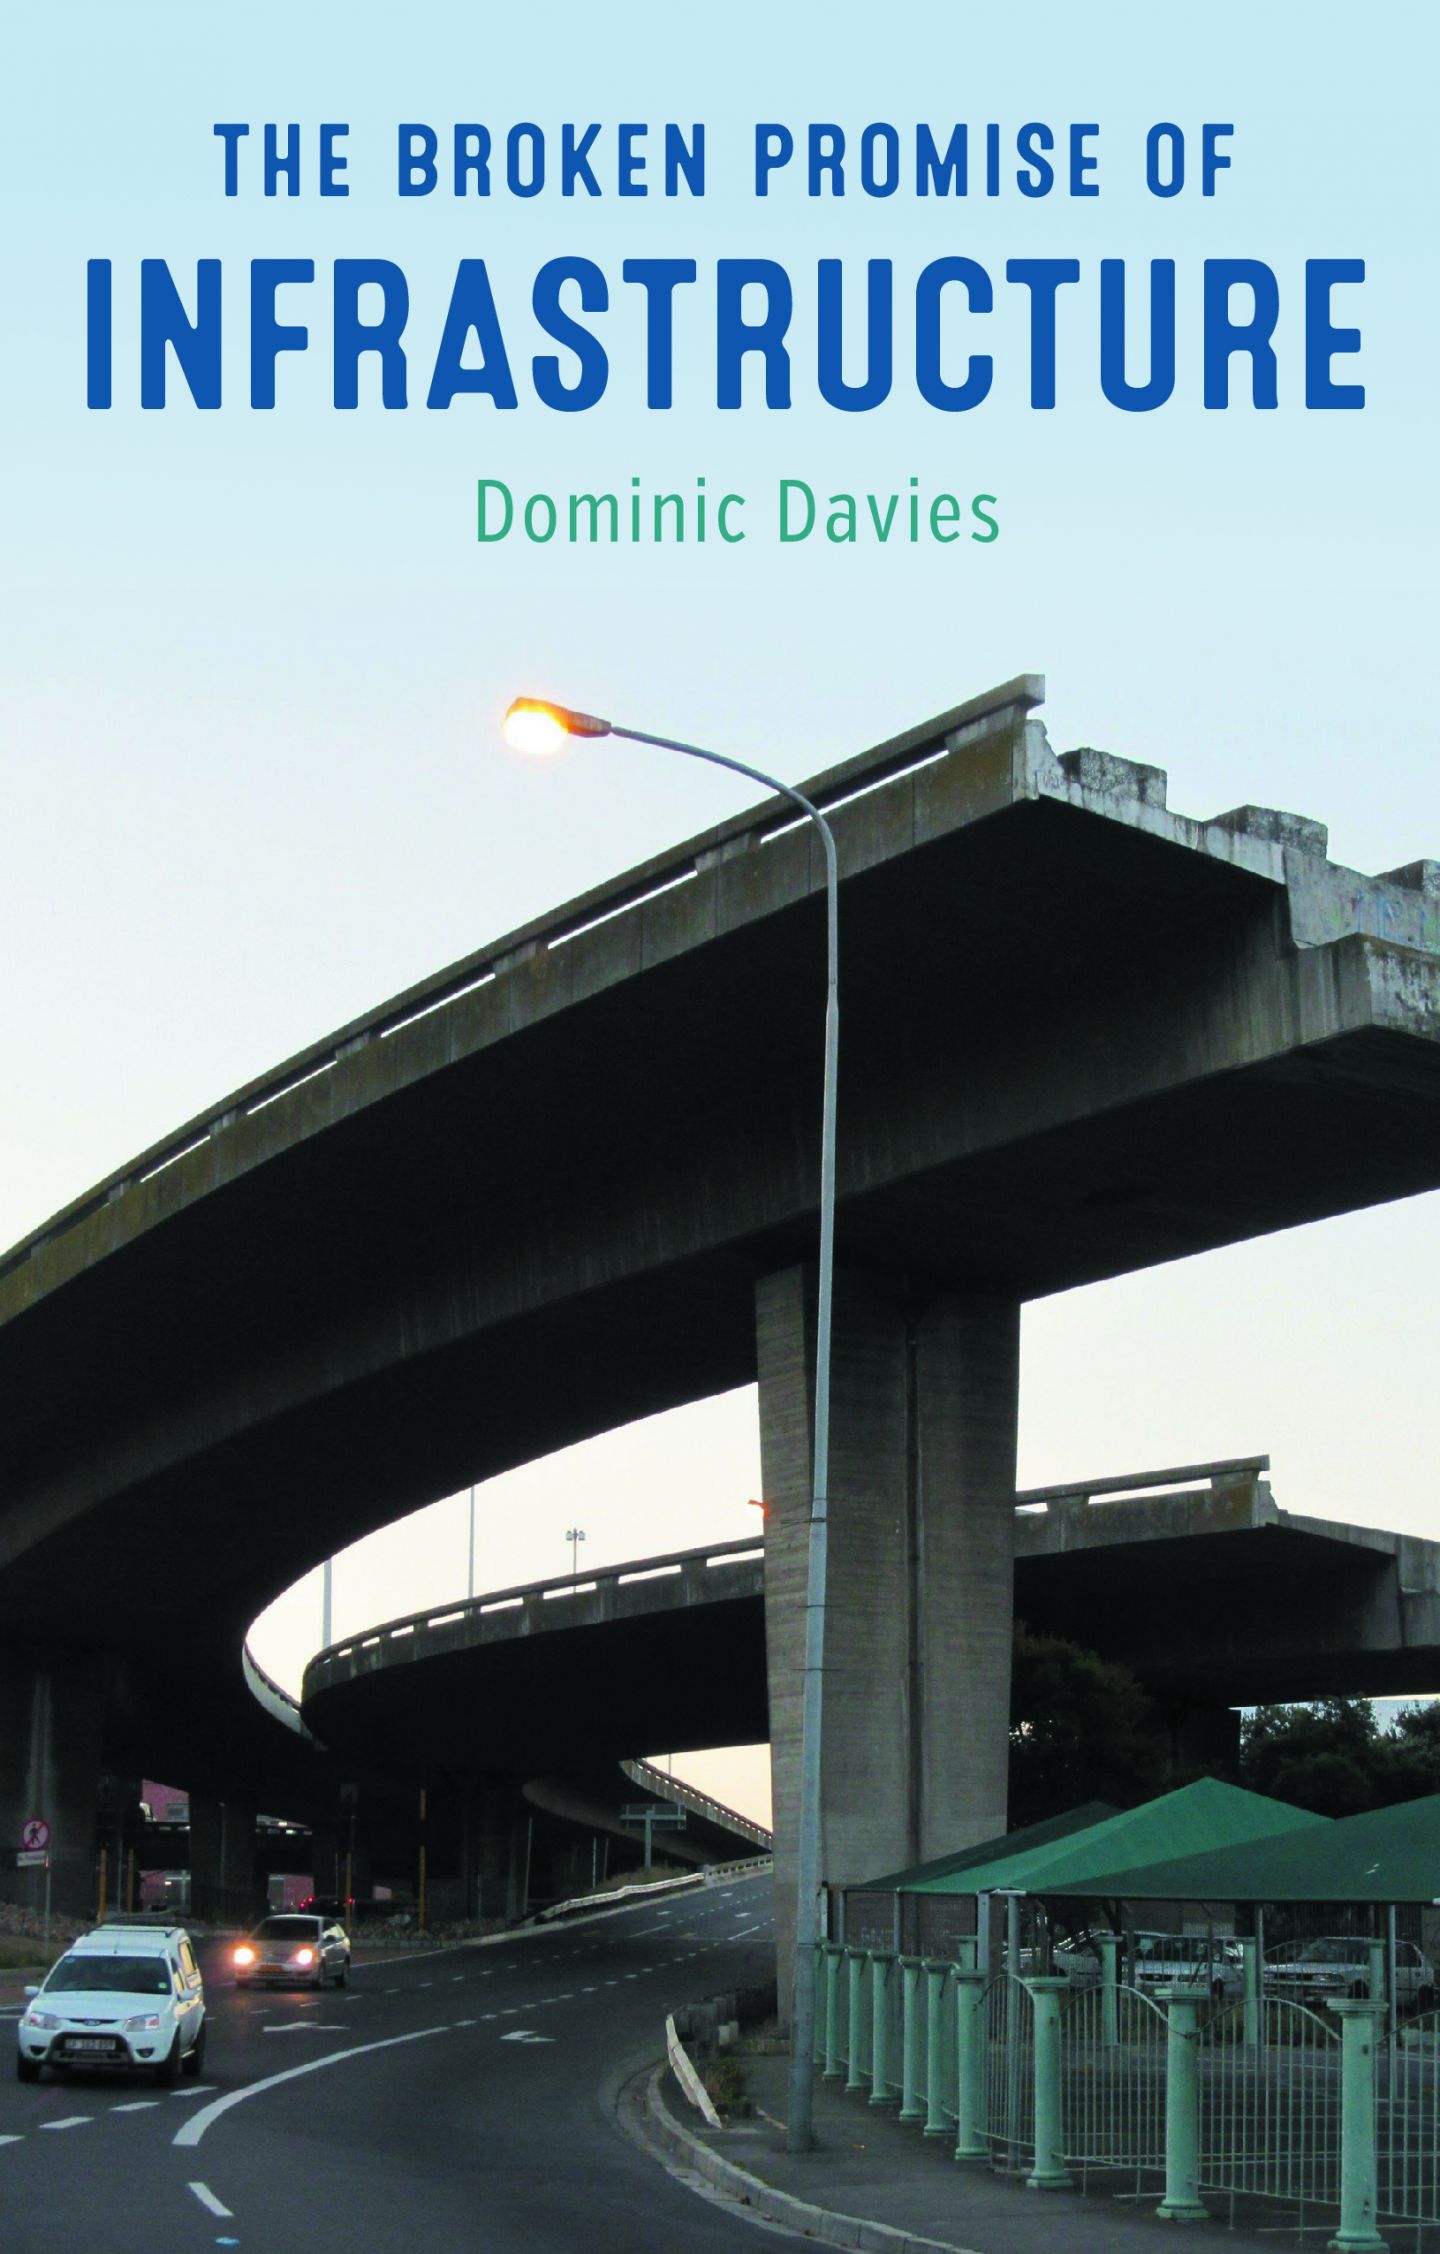 Picture of the cover of Dr Dom Davies' book The Broken Promise of Infrastructure. The image is of a the Foreshore Freeway Bridge, which is an unfinished motorway bridge in Cape Town, South Africa,